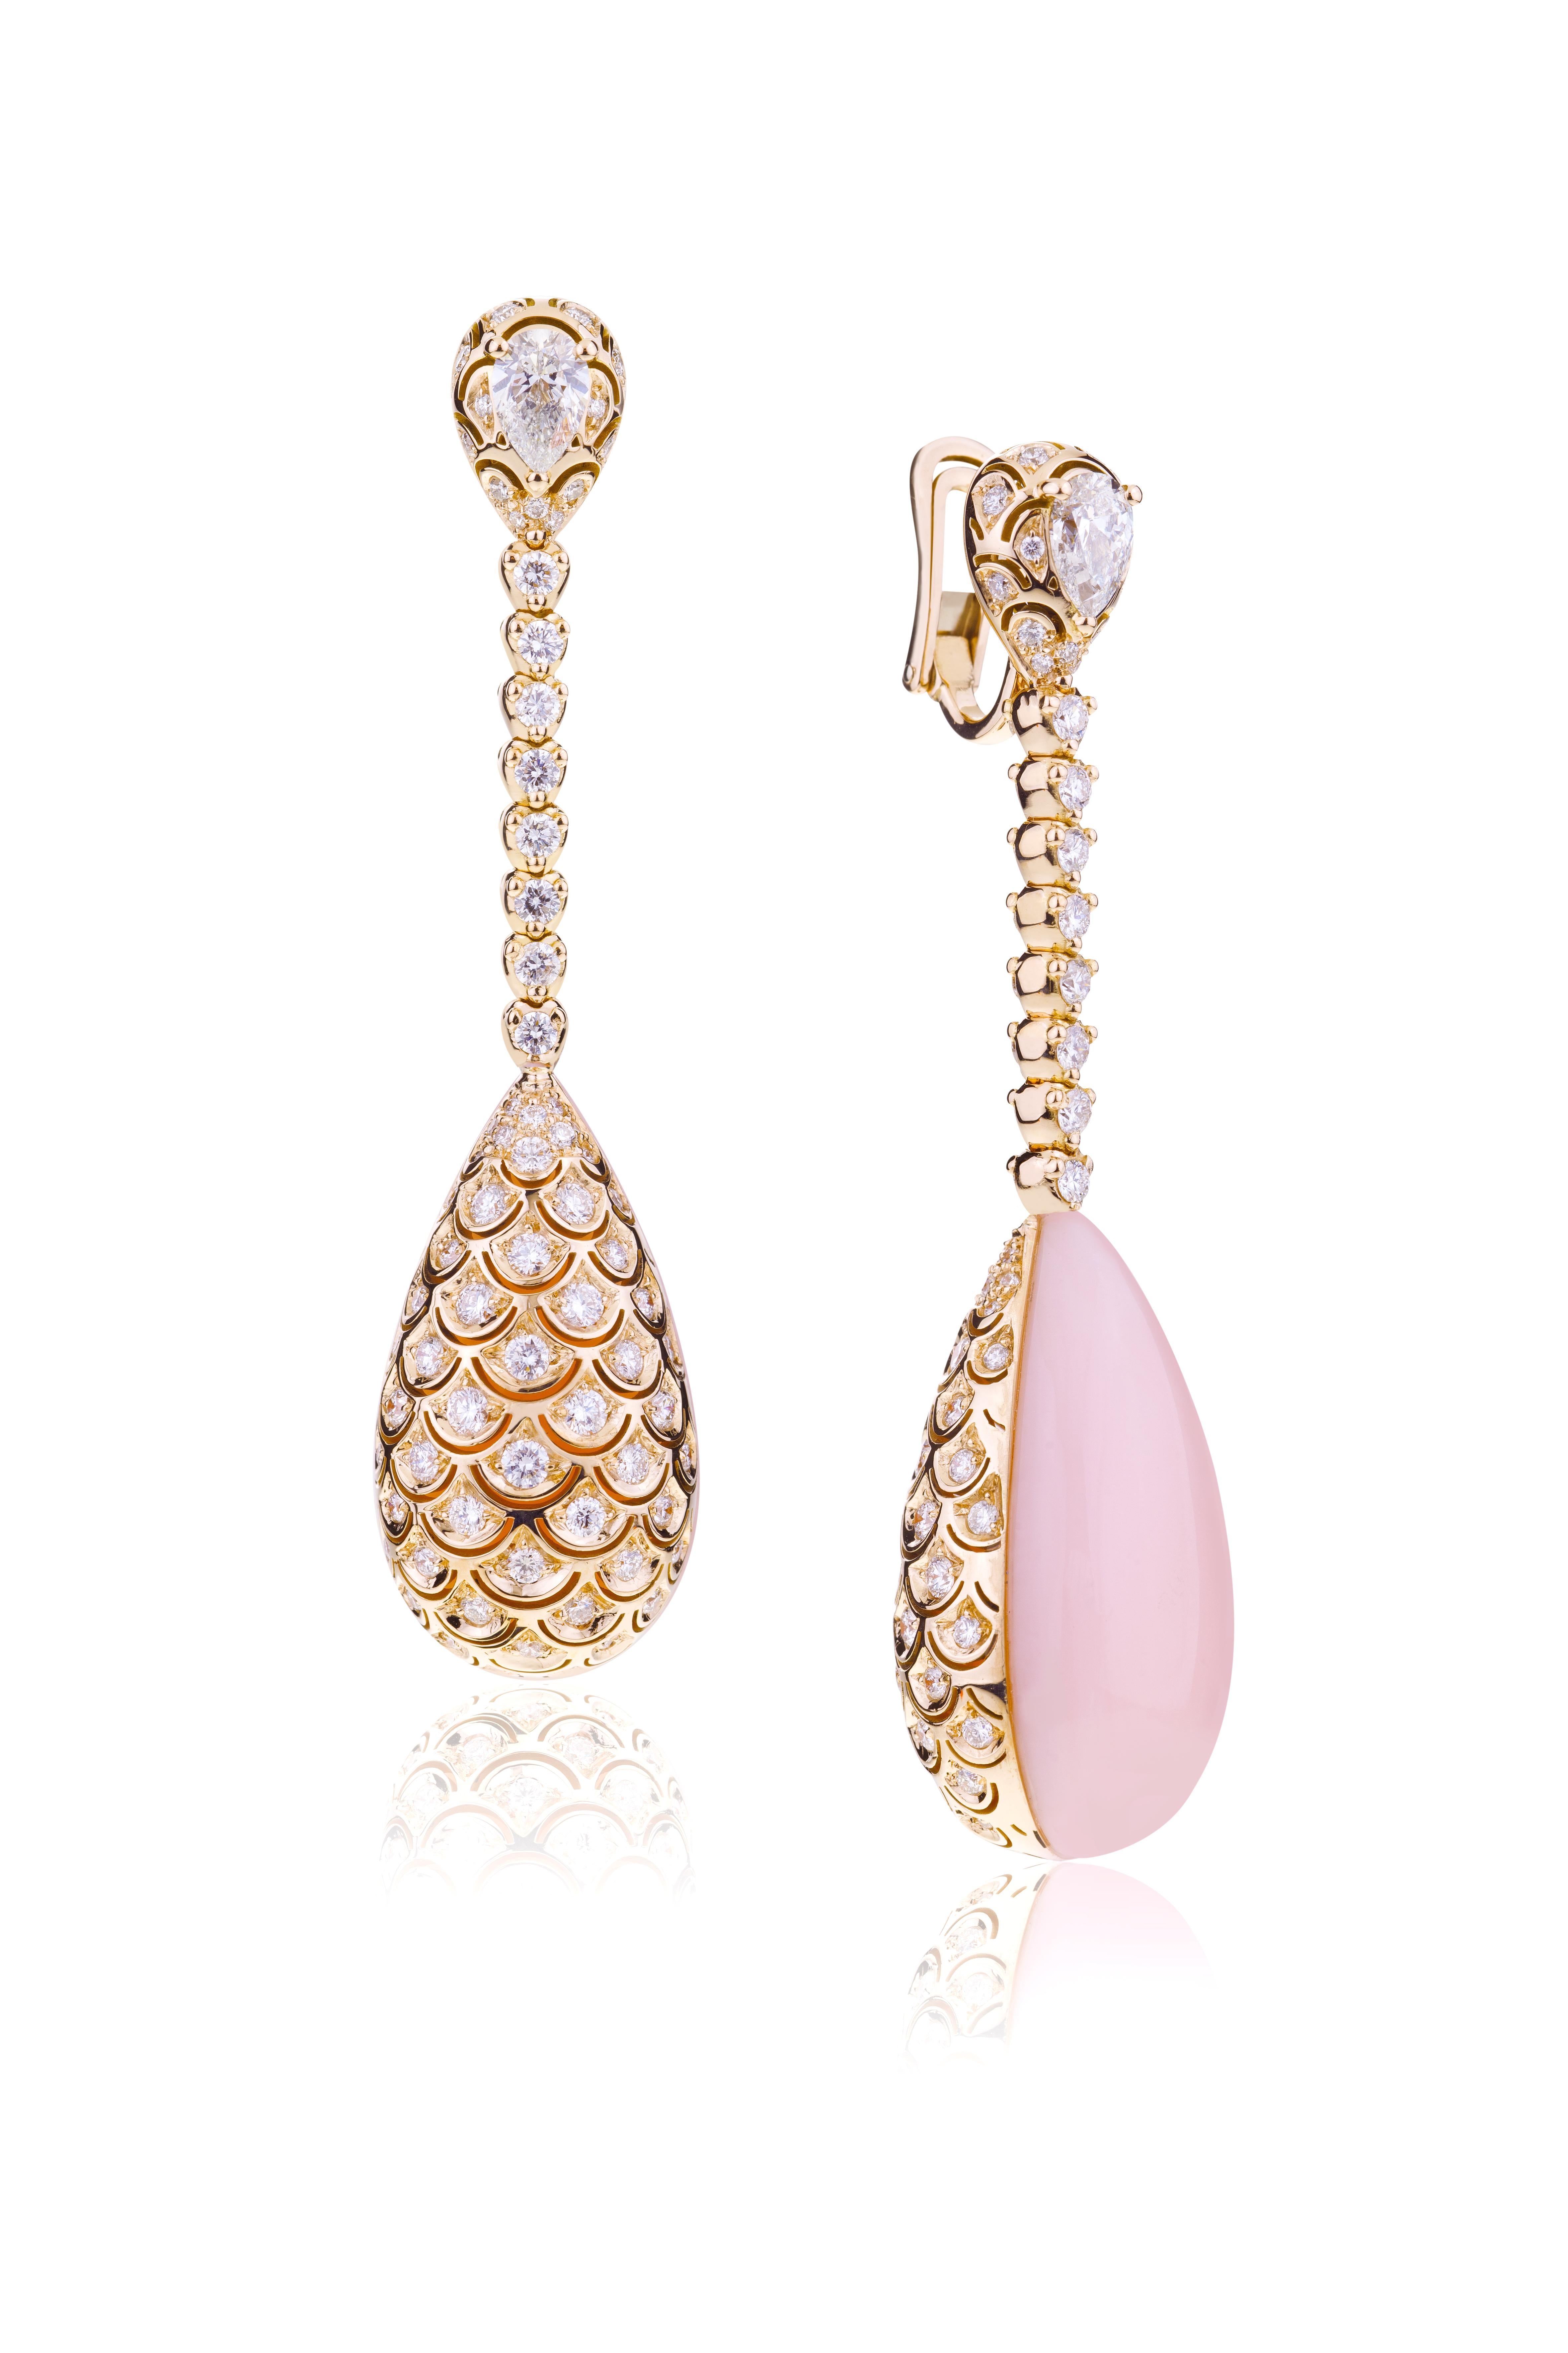 Big Double Face Pink Opal and Diamonds Drop with Pear Cut Diamonds Evening Earrings.
Exceptional Reversible Earrings with a Unique Spring Handmade Mechanism to wear Diamonds or Pink Opal. Both positions allows to see a wonderful back for Your